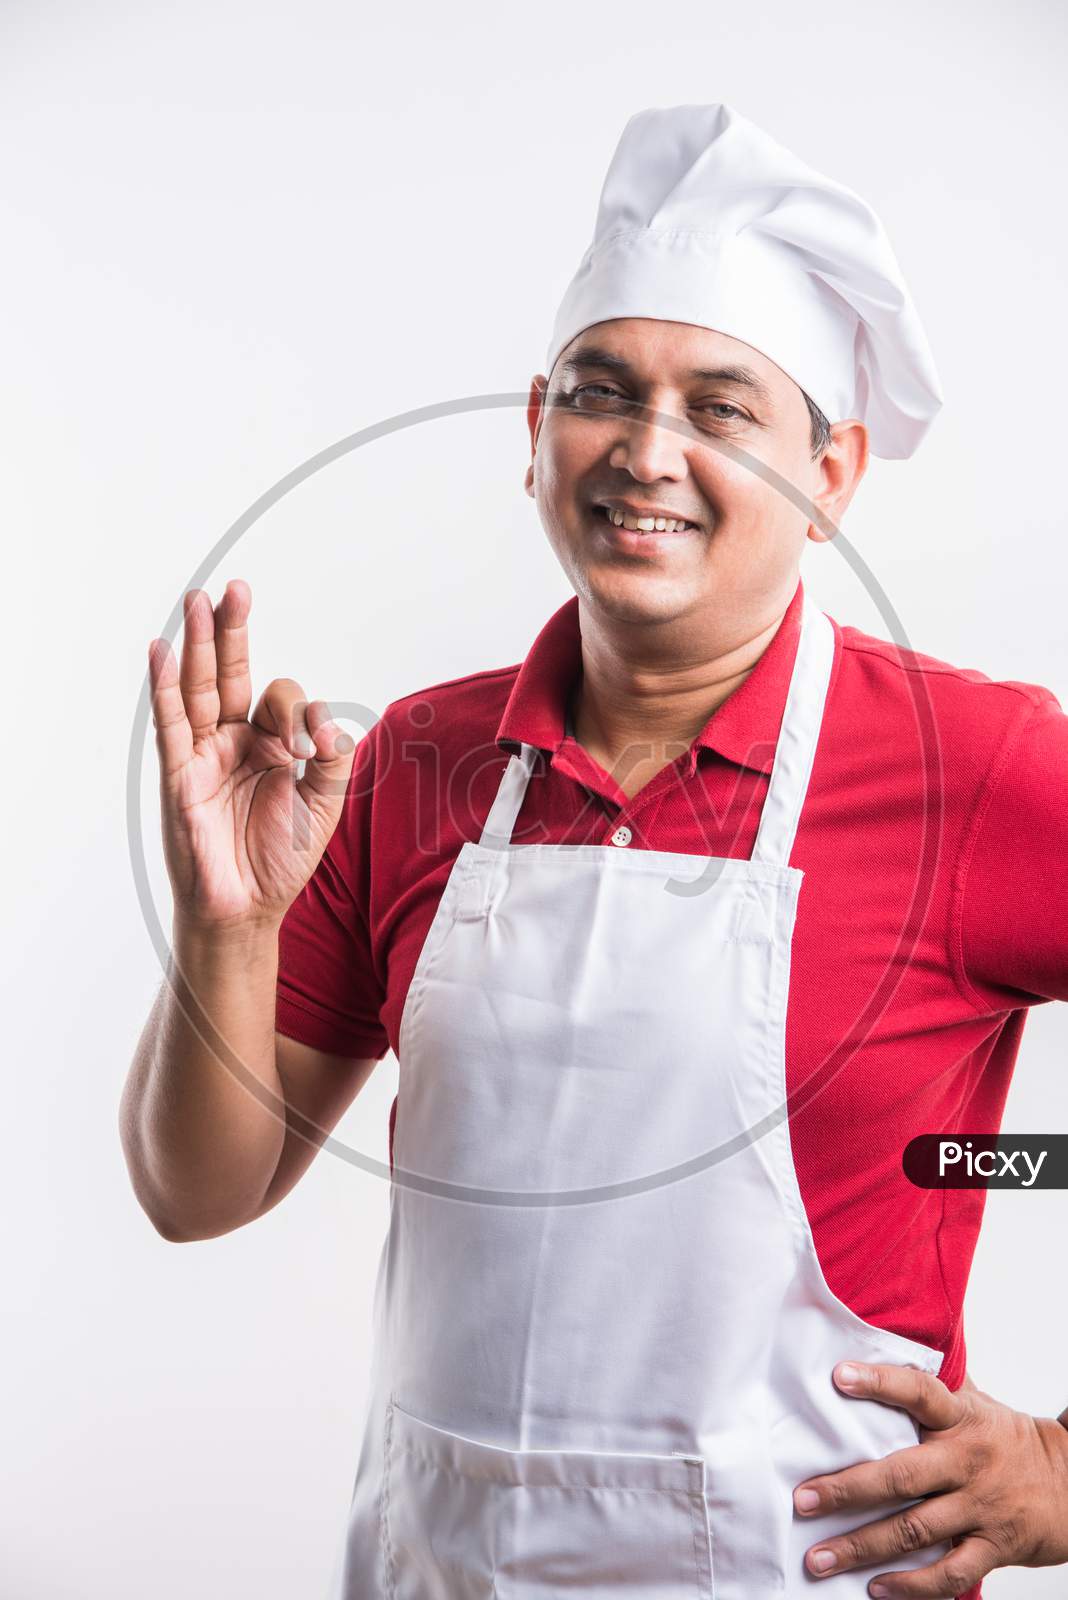 Image Of Indian Male Chef Cook In Apron And Wearing Hat Hj997774 Picxy 